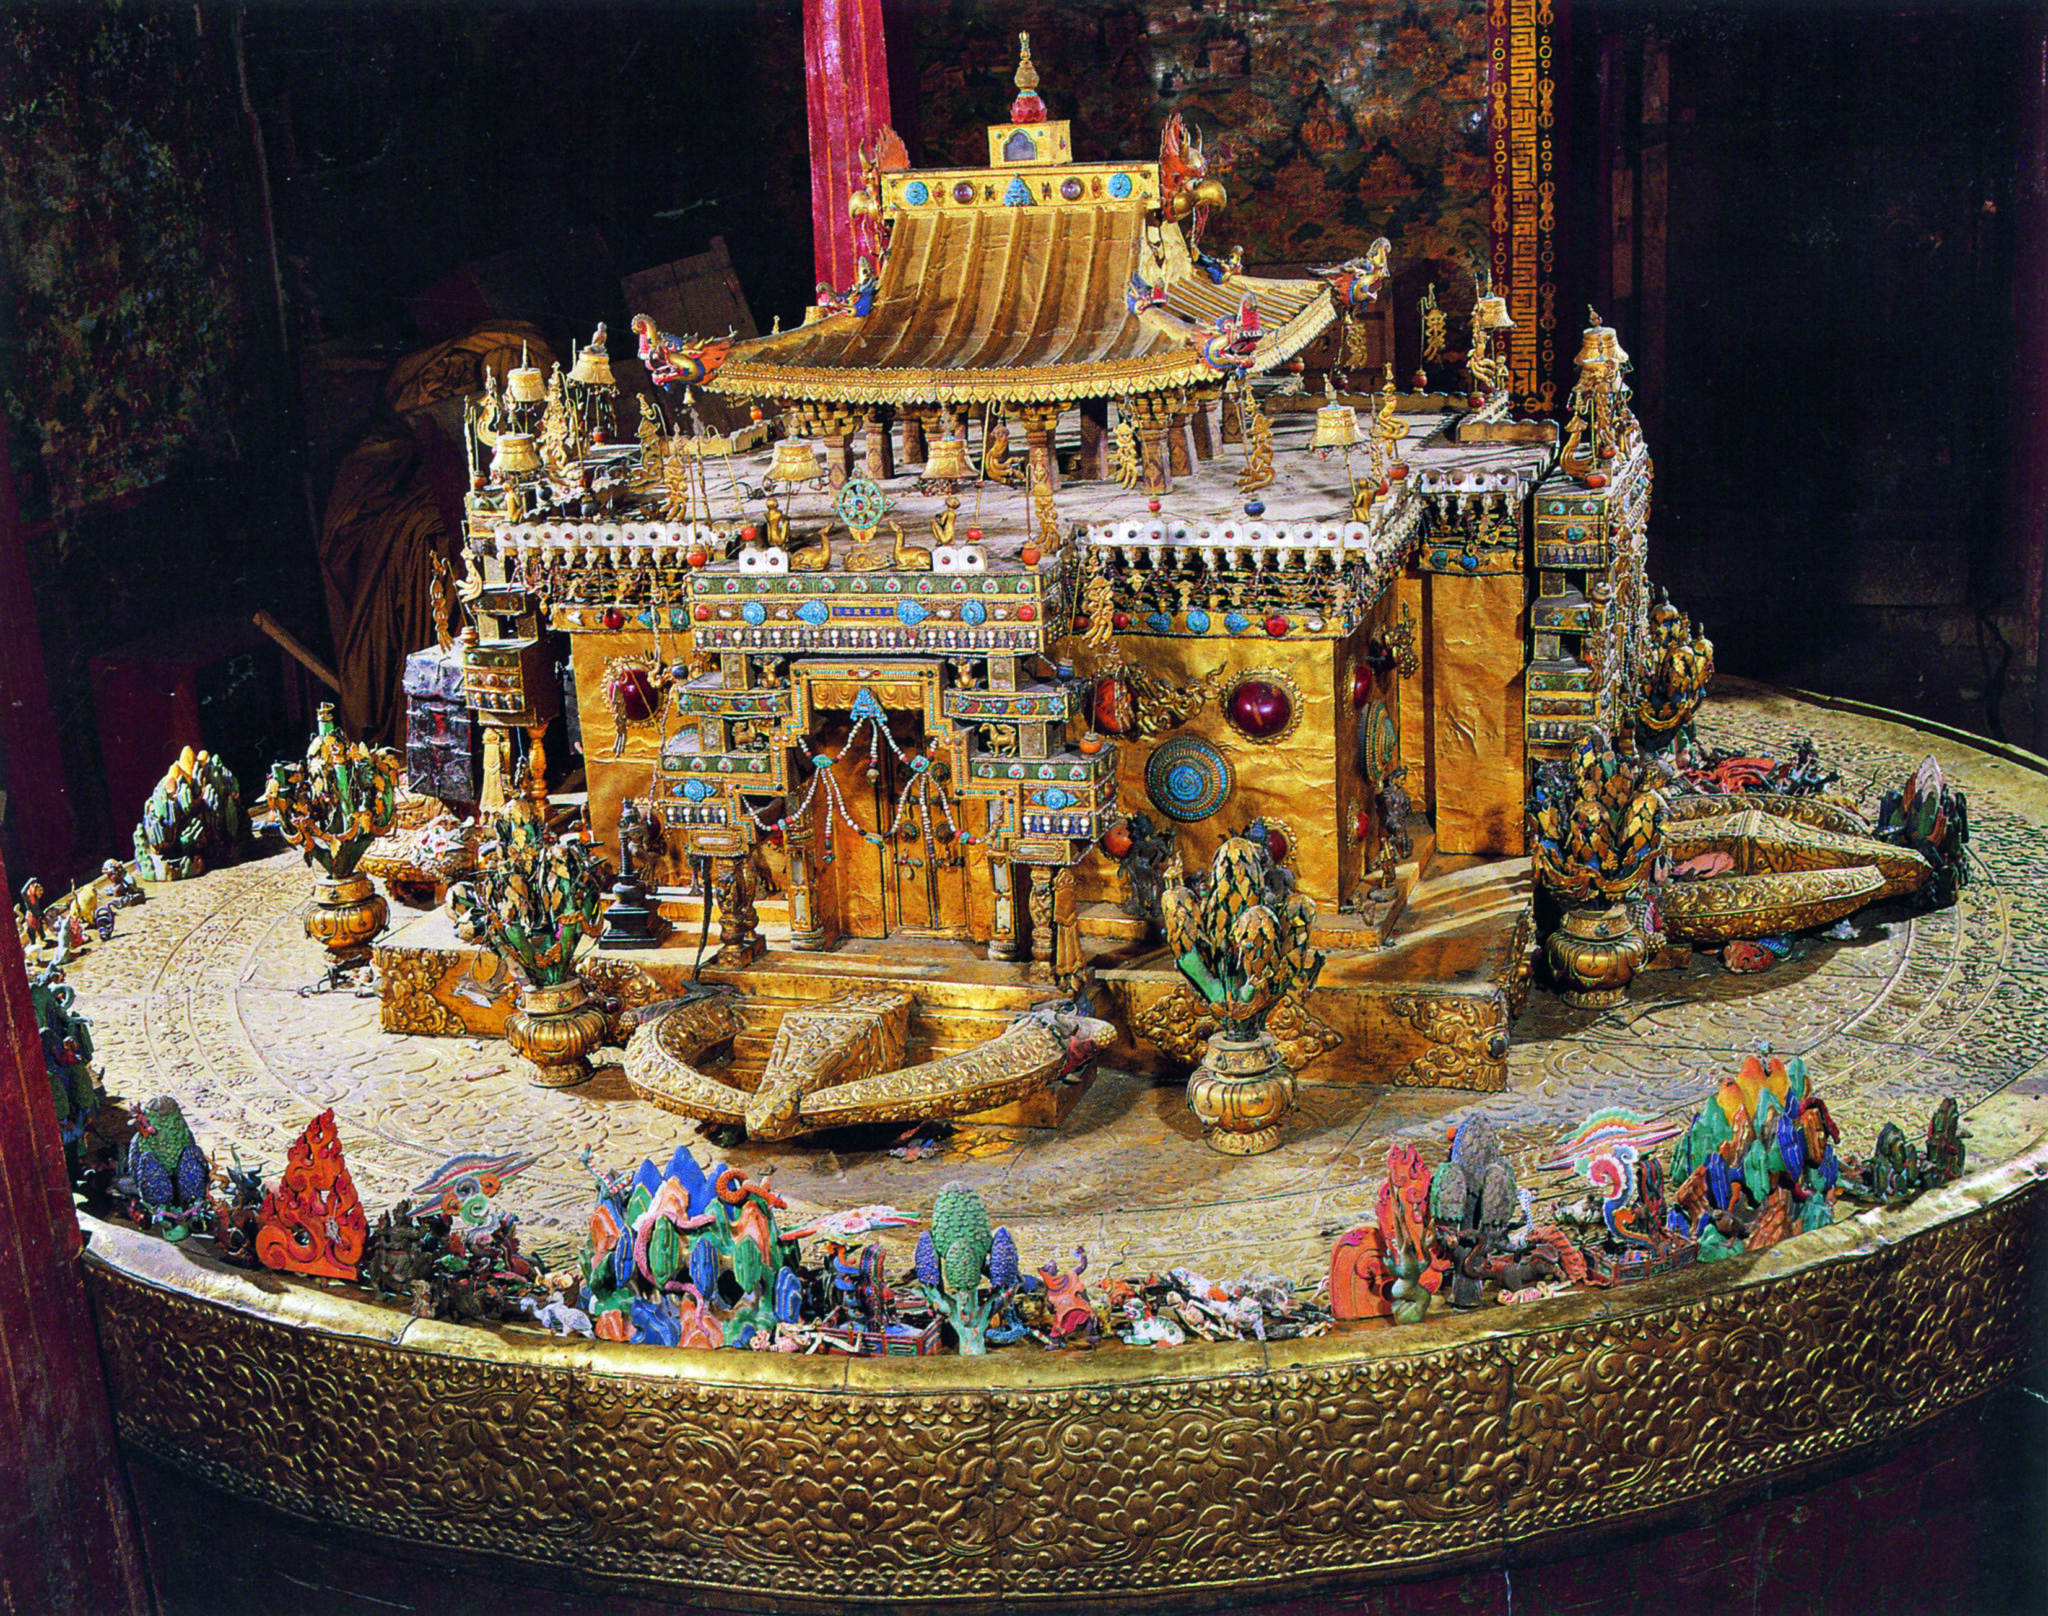 Three-dimensional mandala in the form of golden pagoda-roofed palace decorated with colorful inset stones